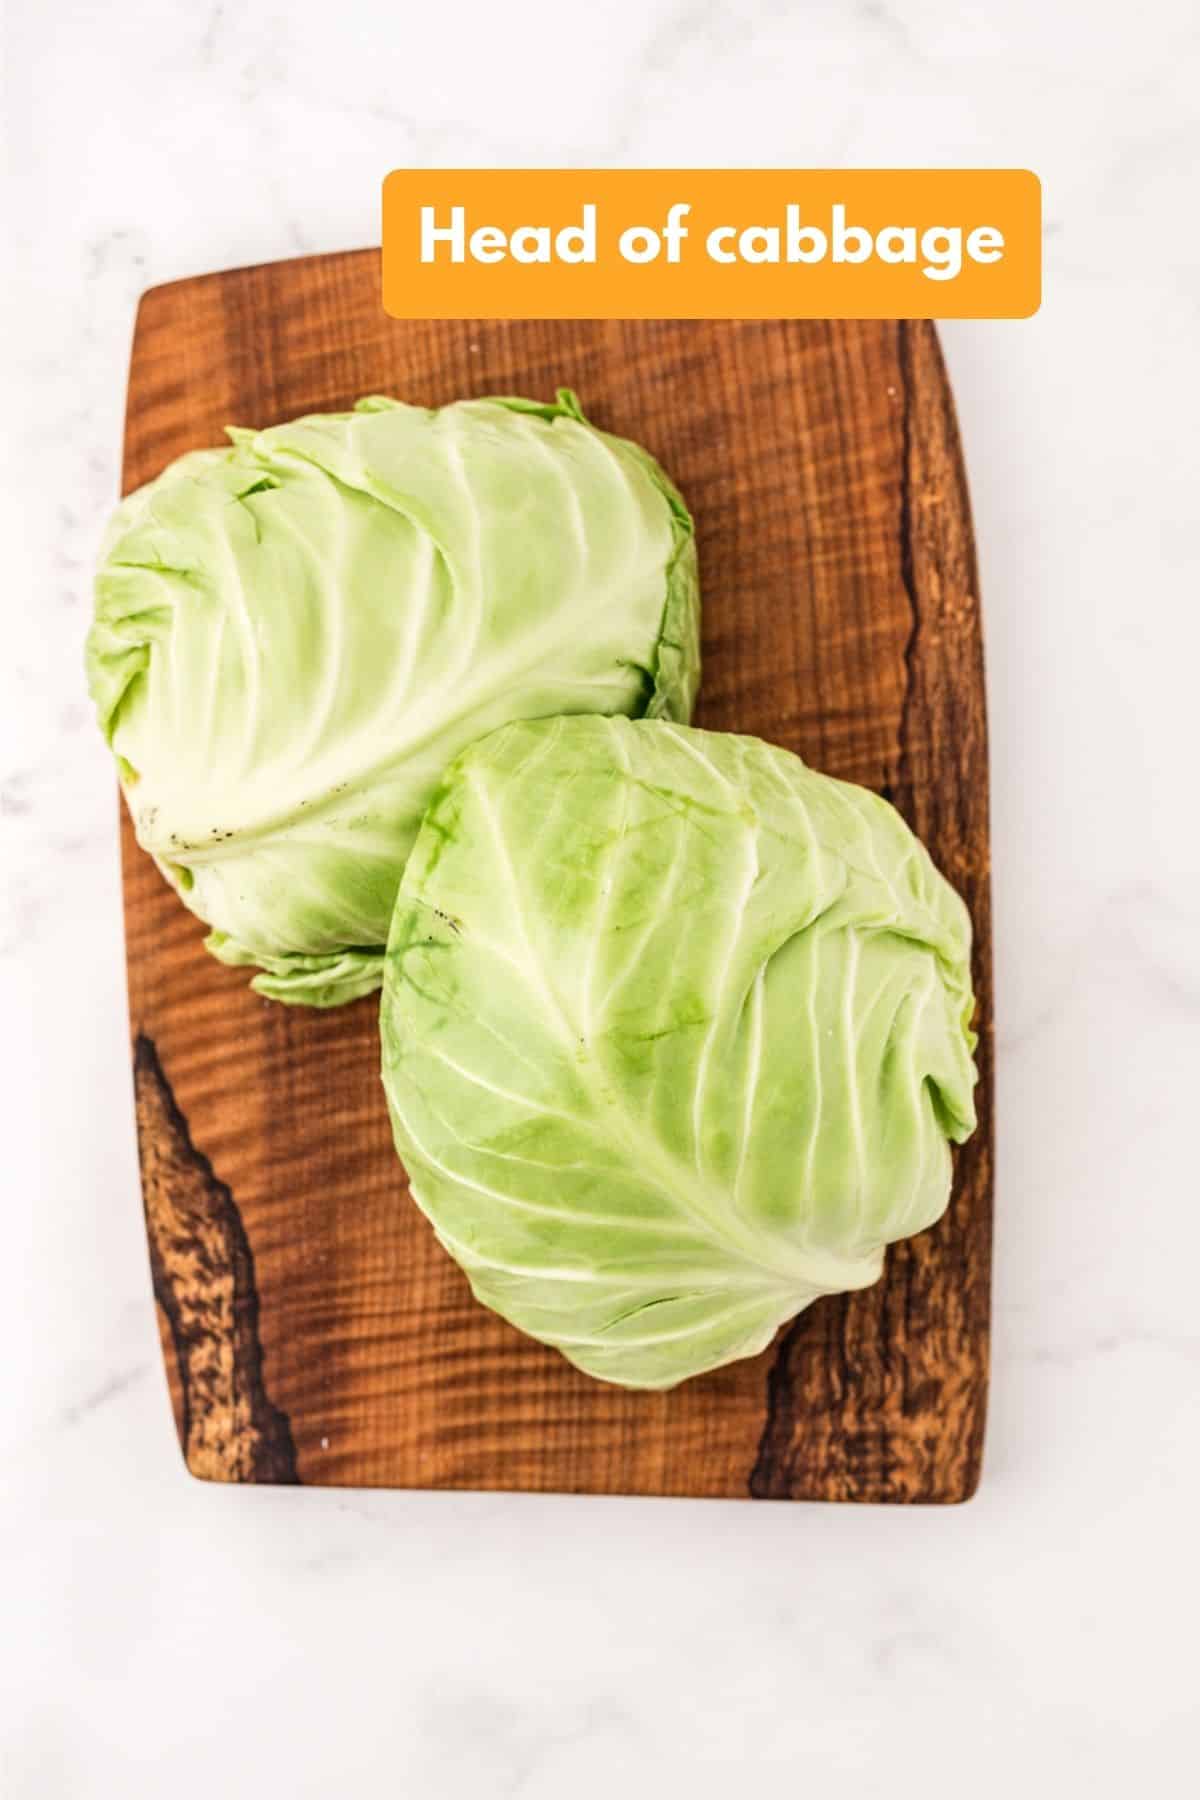 a head of cabbage.